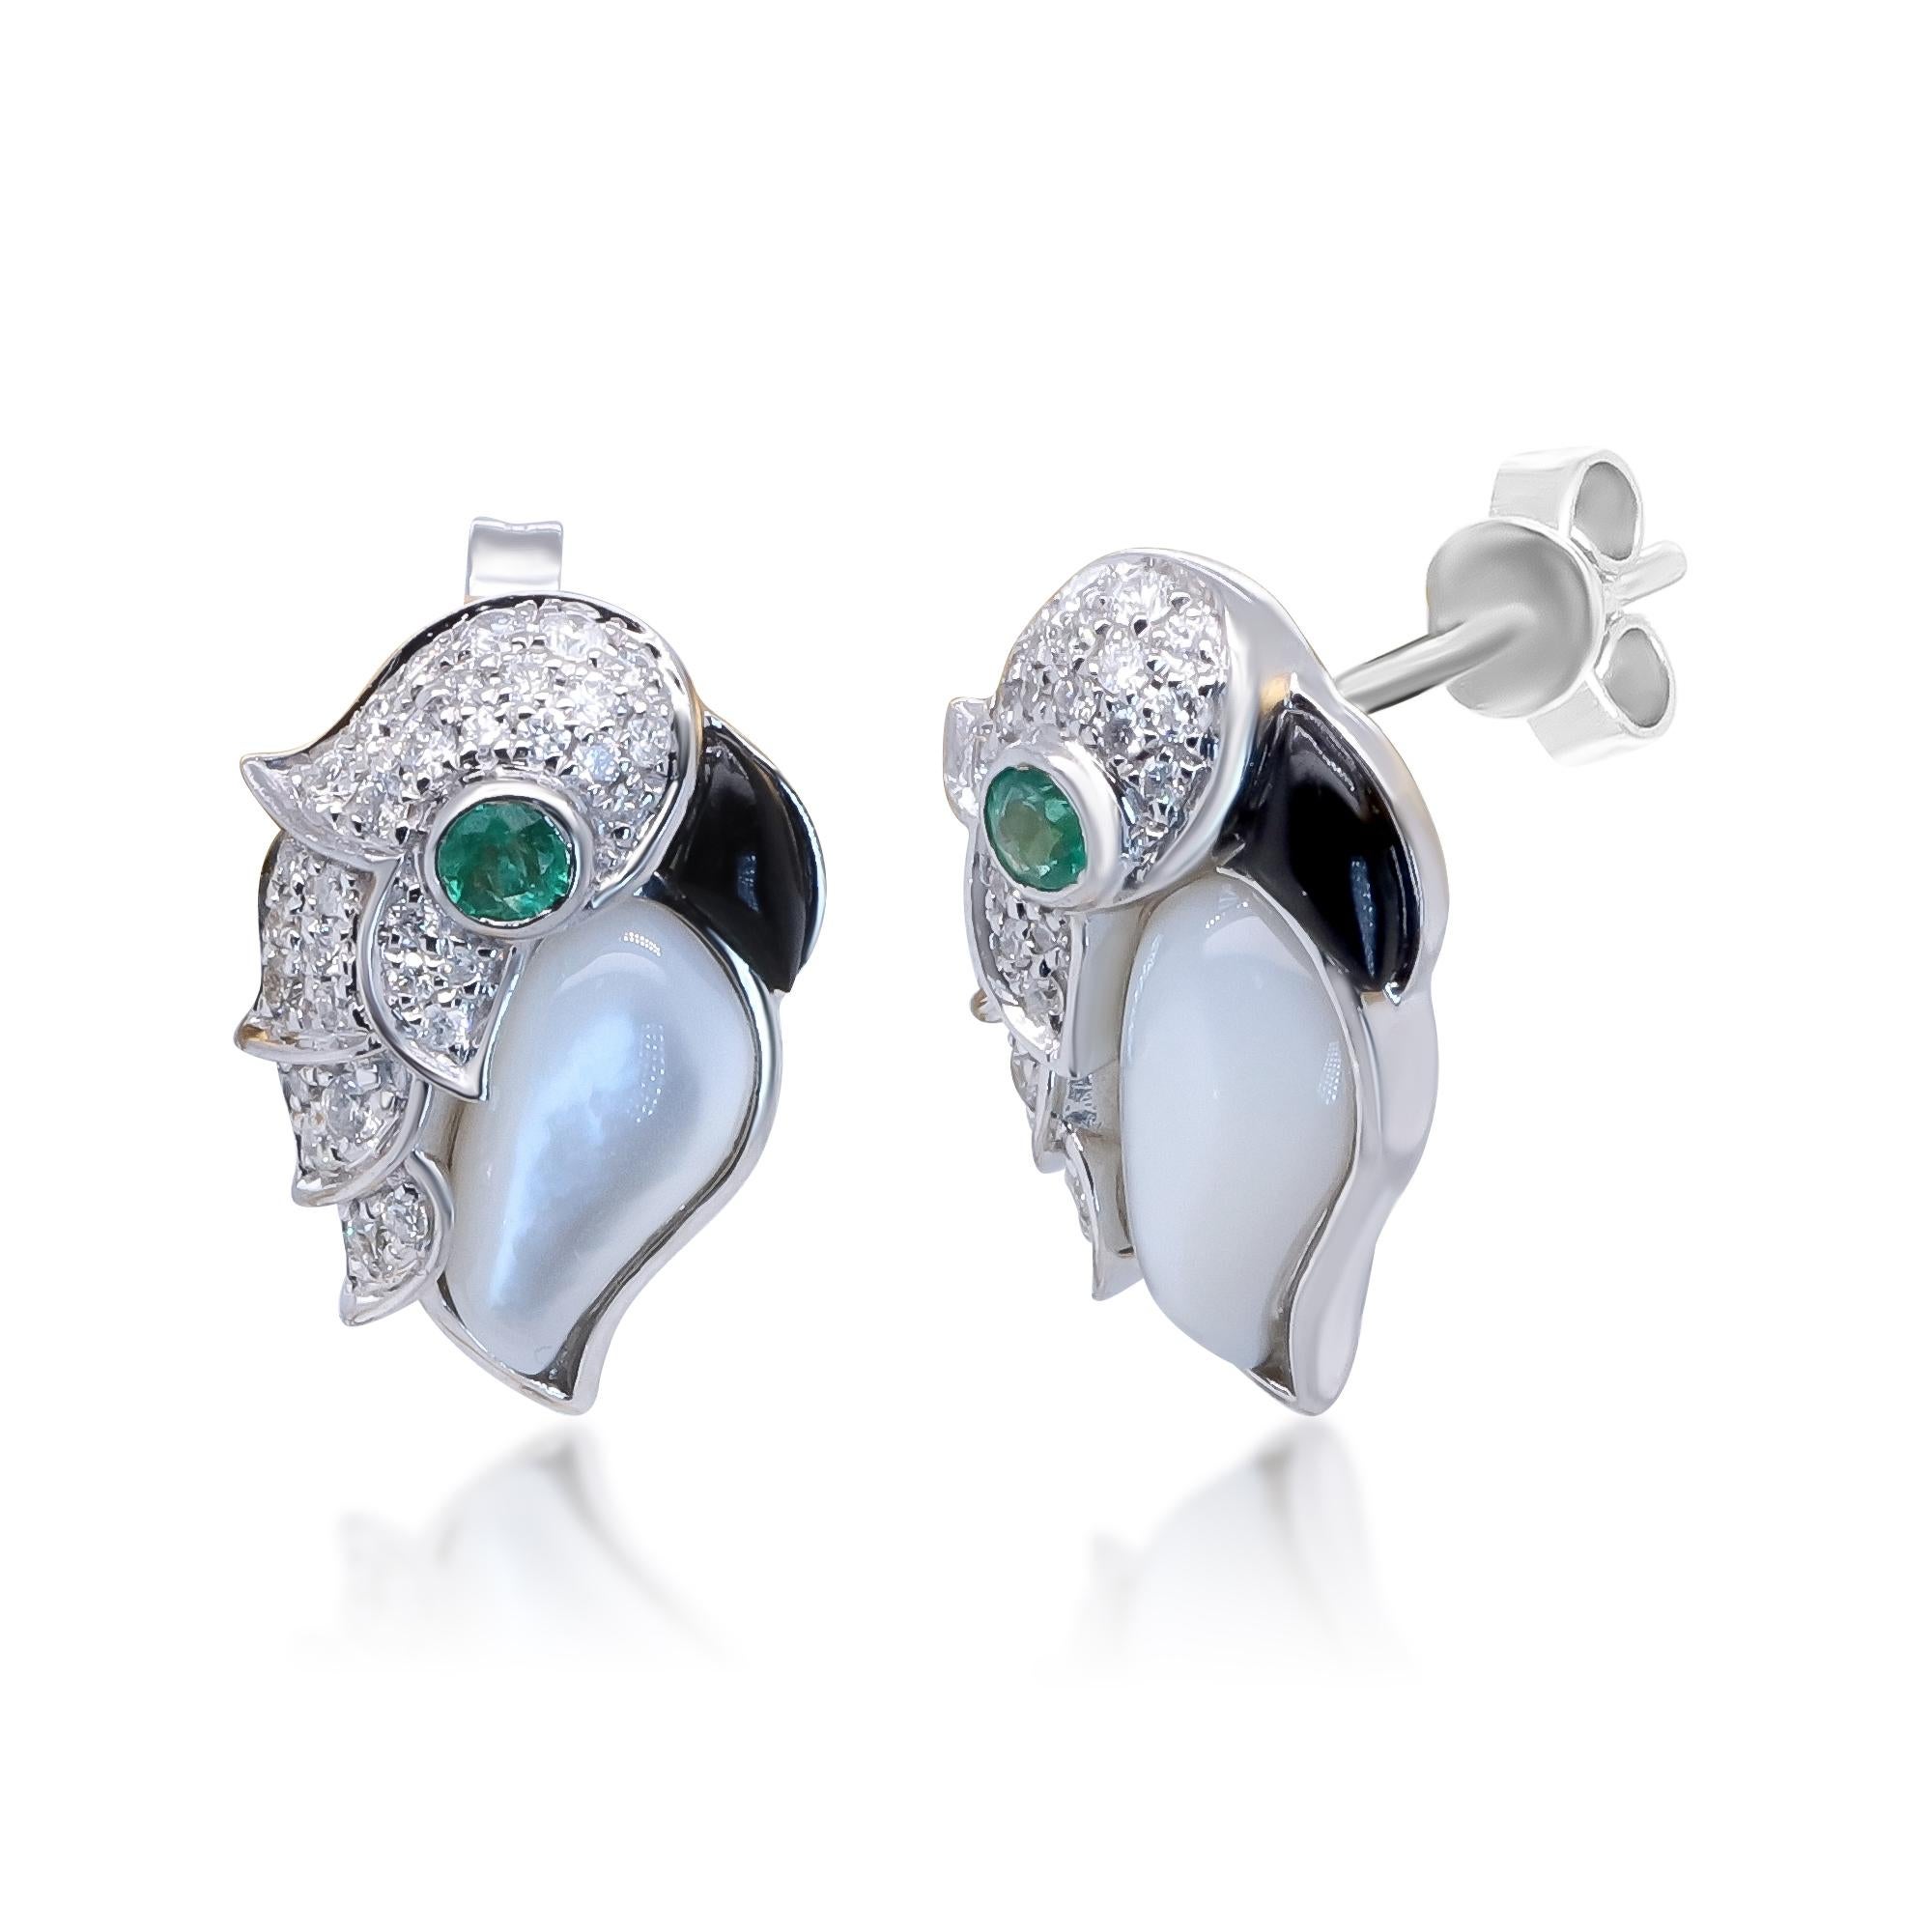 Decorate yourself in elegance with this Earring crafted from 14K White Gold by Gin & Grace. This Earring is made up of Emerald Round-Cut (6 pcs) 2.49 carat and Round-cut Diamond (62 Pcs) 0.34 Carat. This Earring weighs 4.26 grams. This delicate